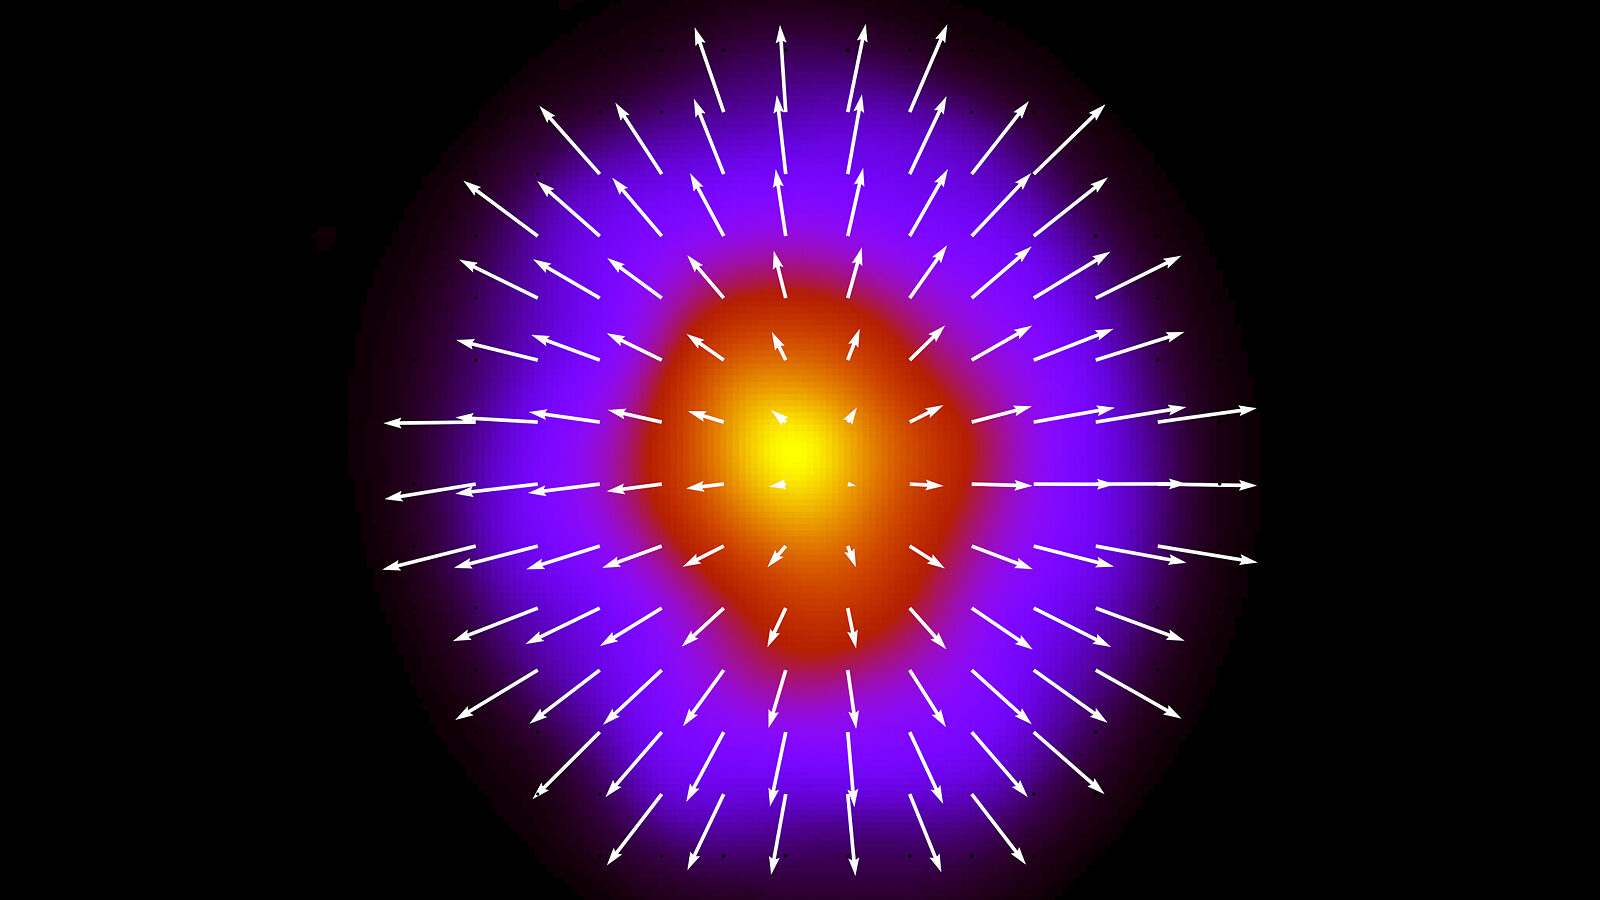 Still from a video showing a simulation of the formation of quark-gluon plasma